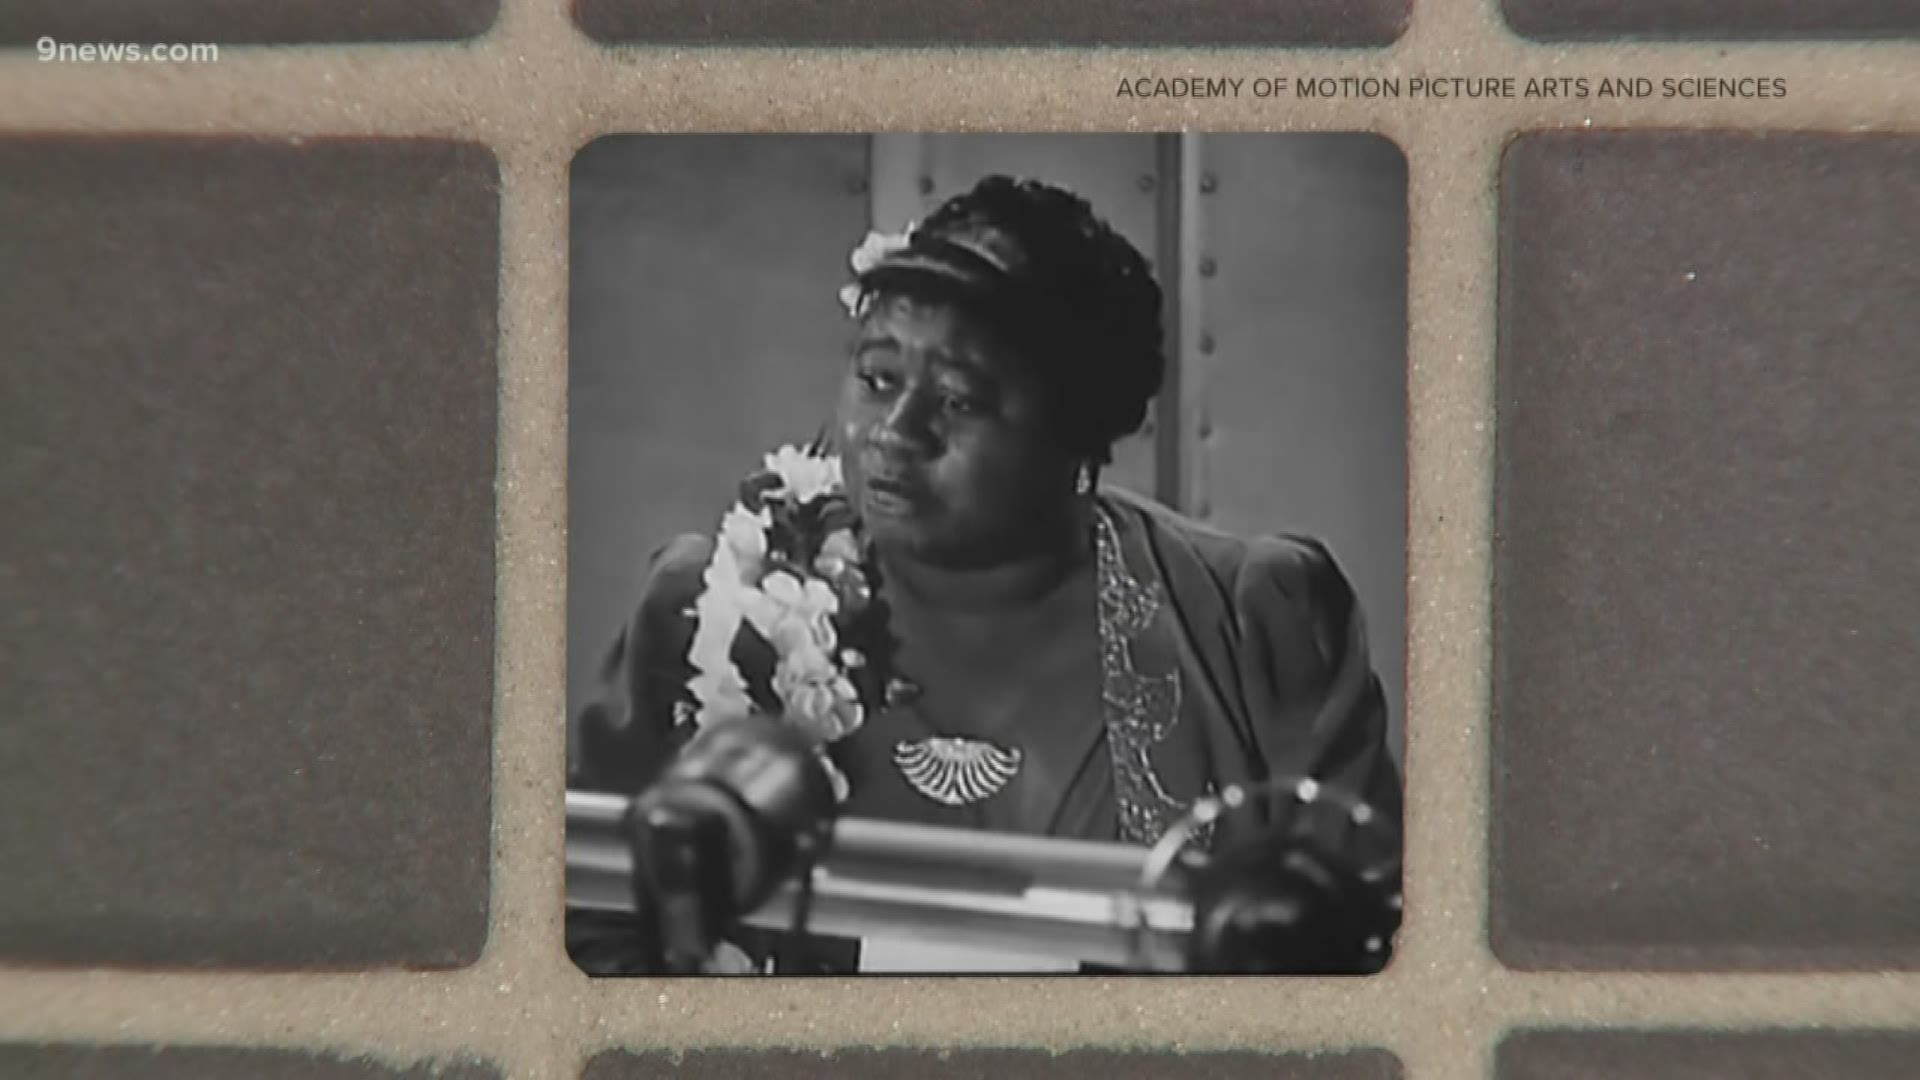 University gets replacement for Oscar from Hattie McDaniel | wusa9.com